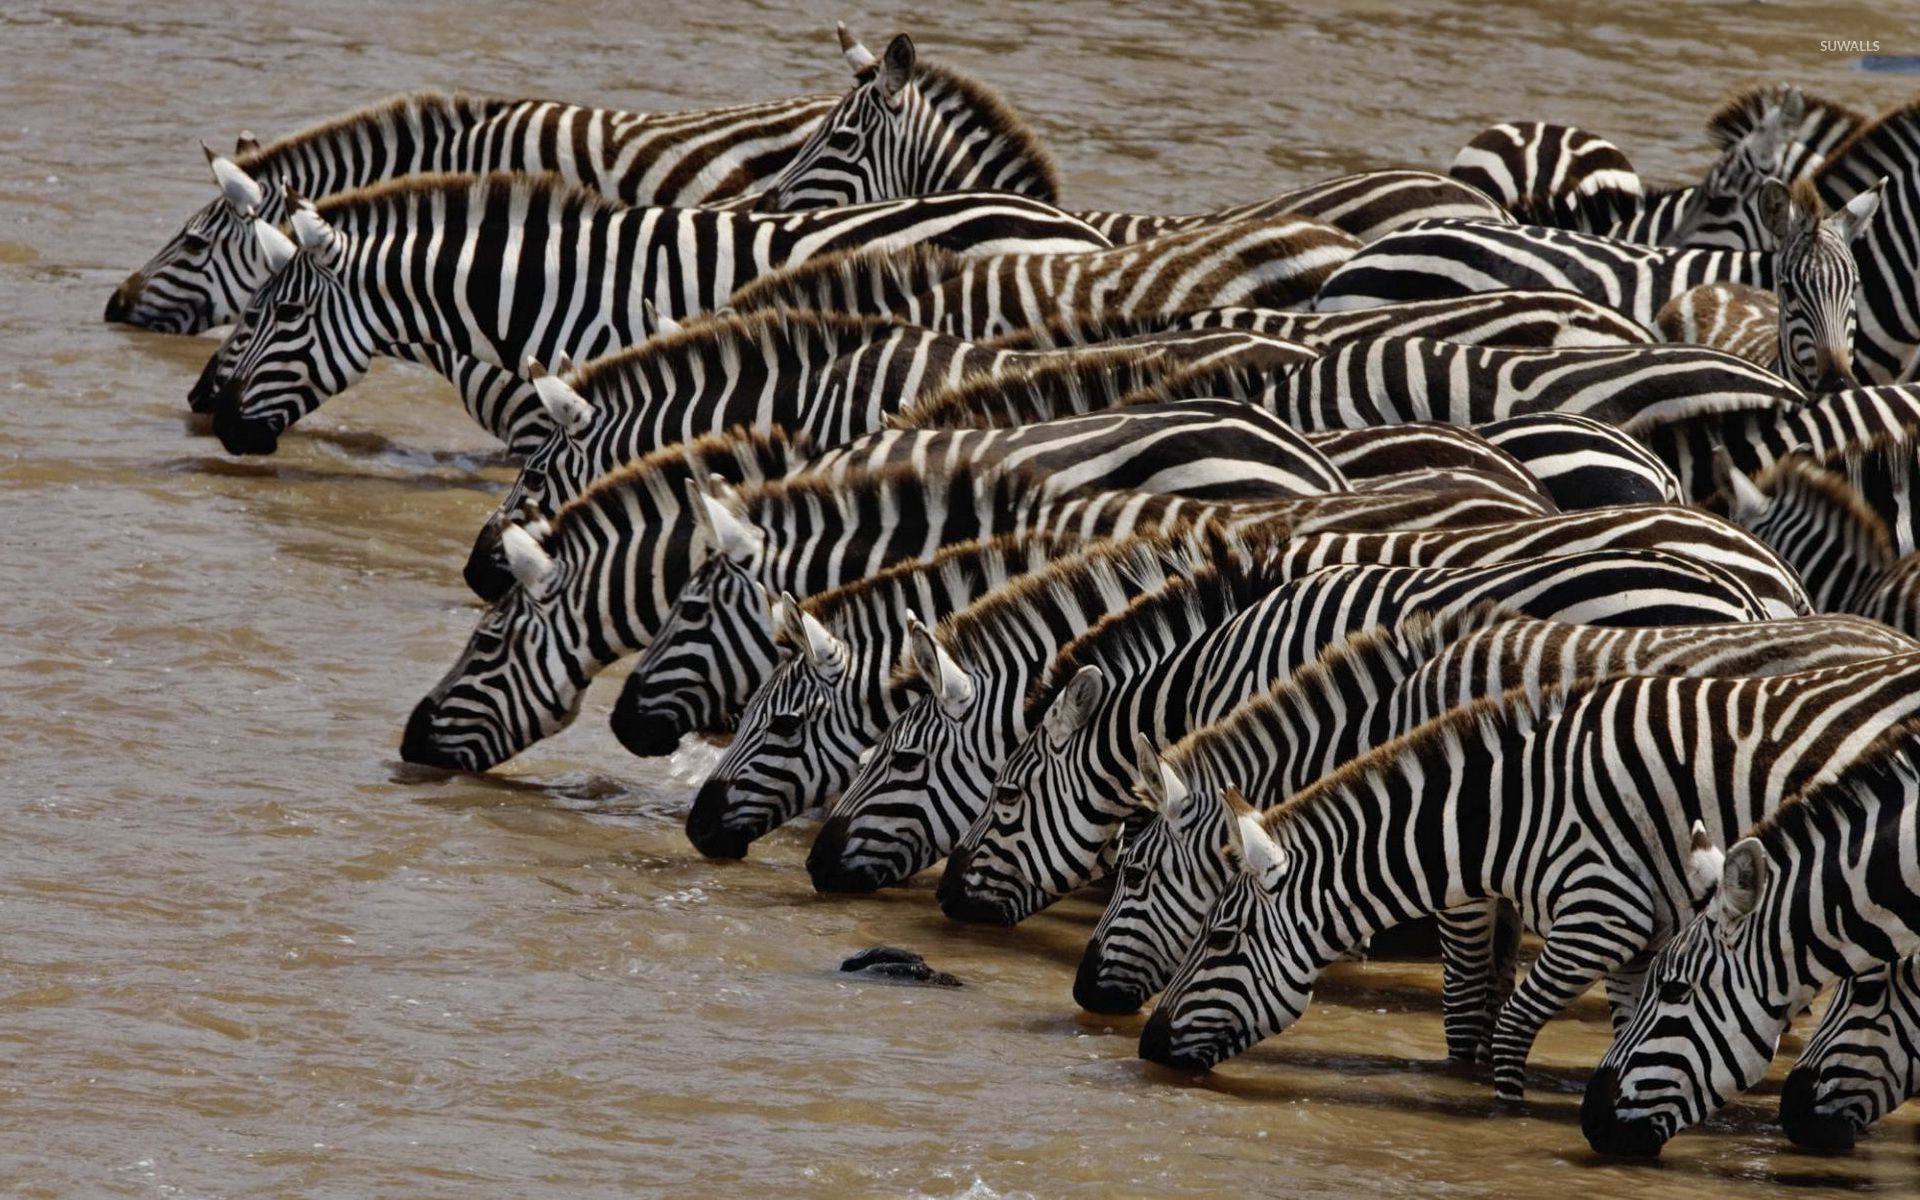 Zebras drinking water from the river wallpaper - Animal wallpapers - #50456